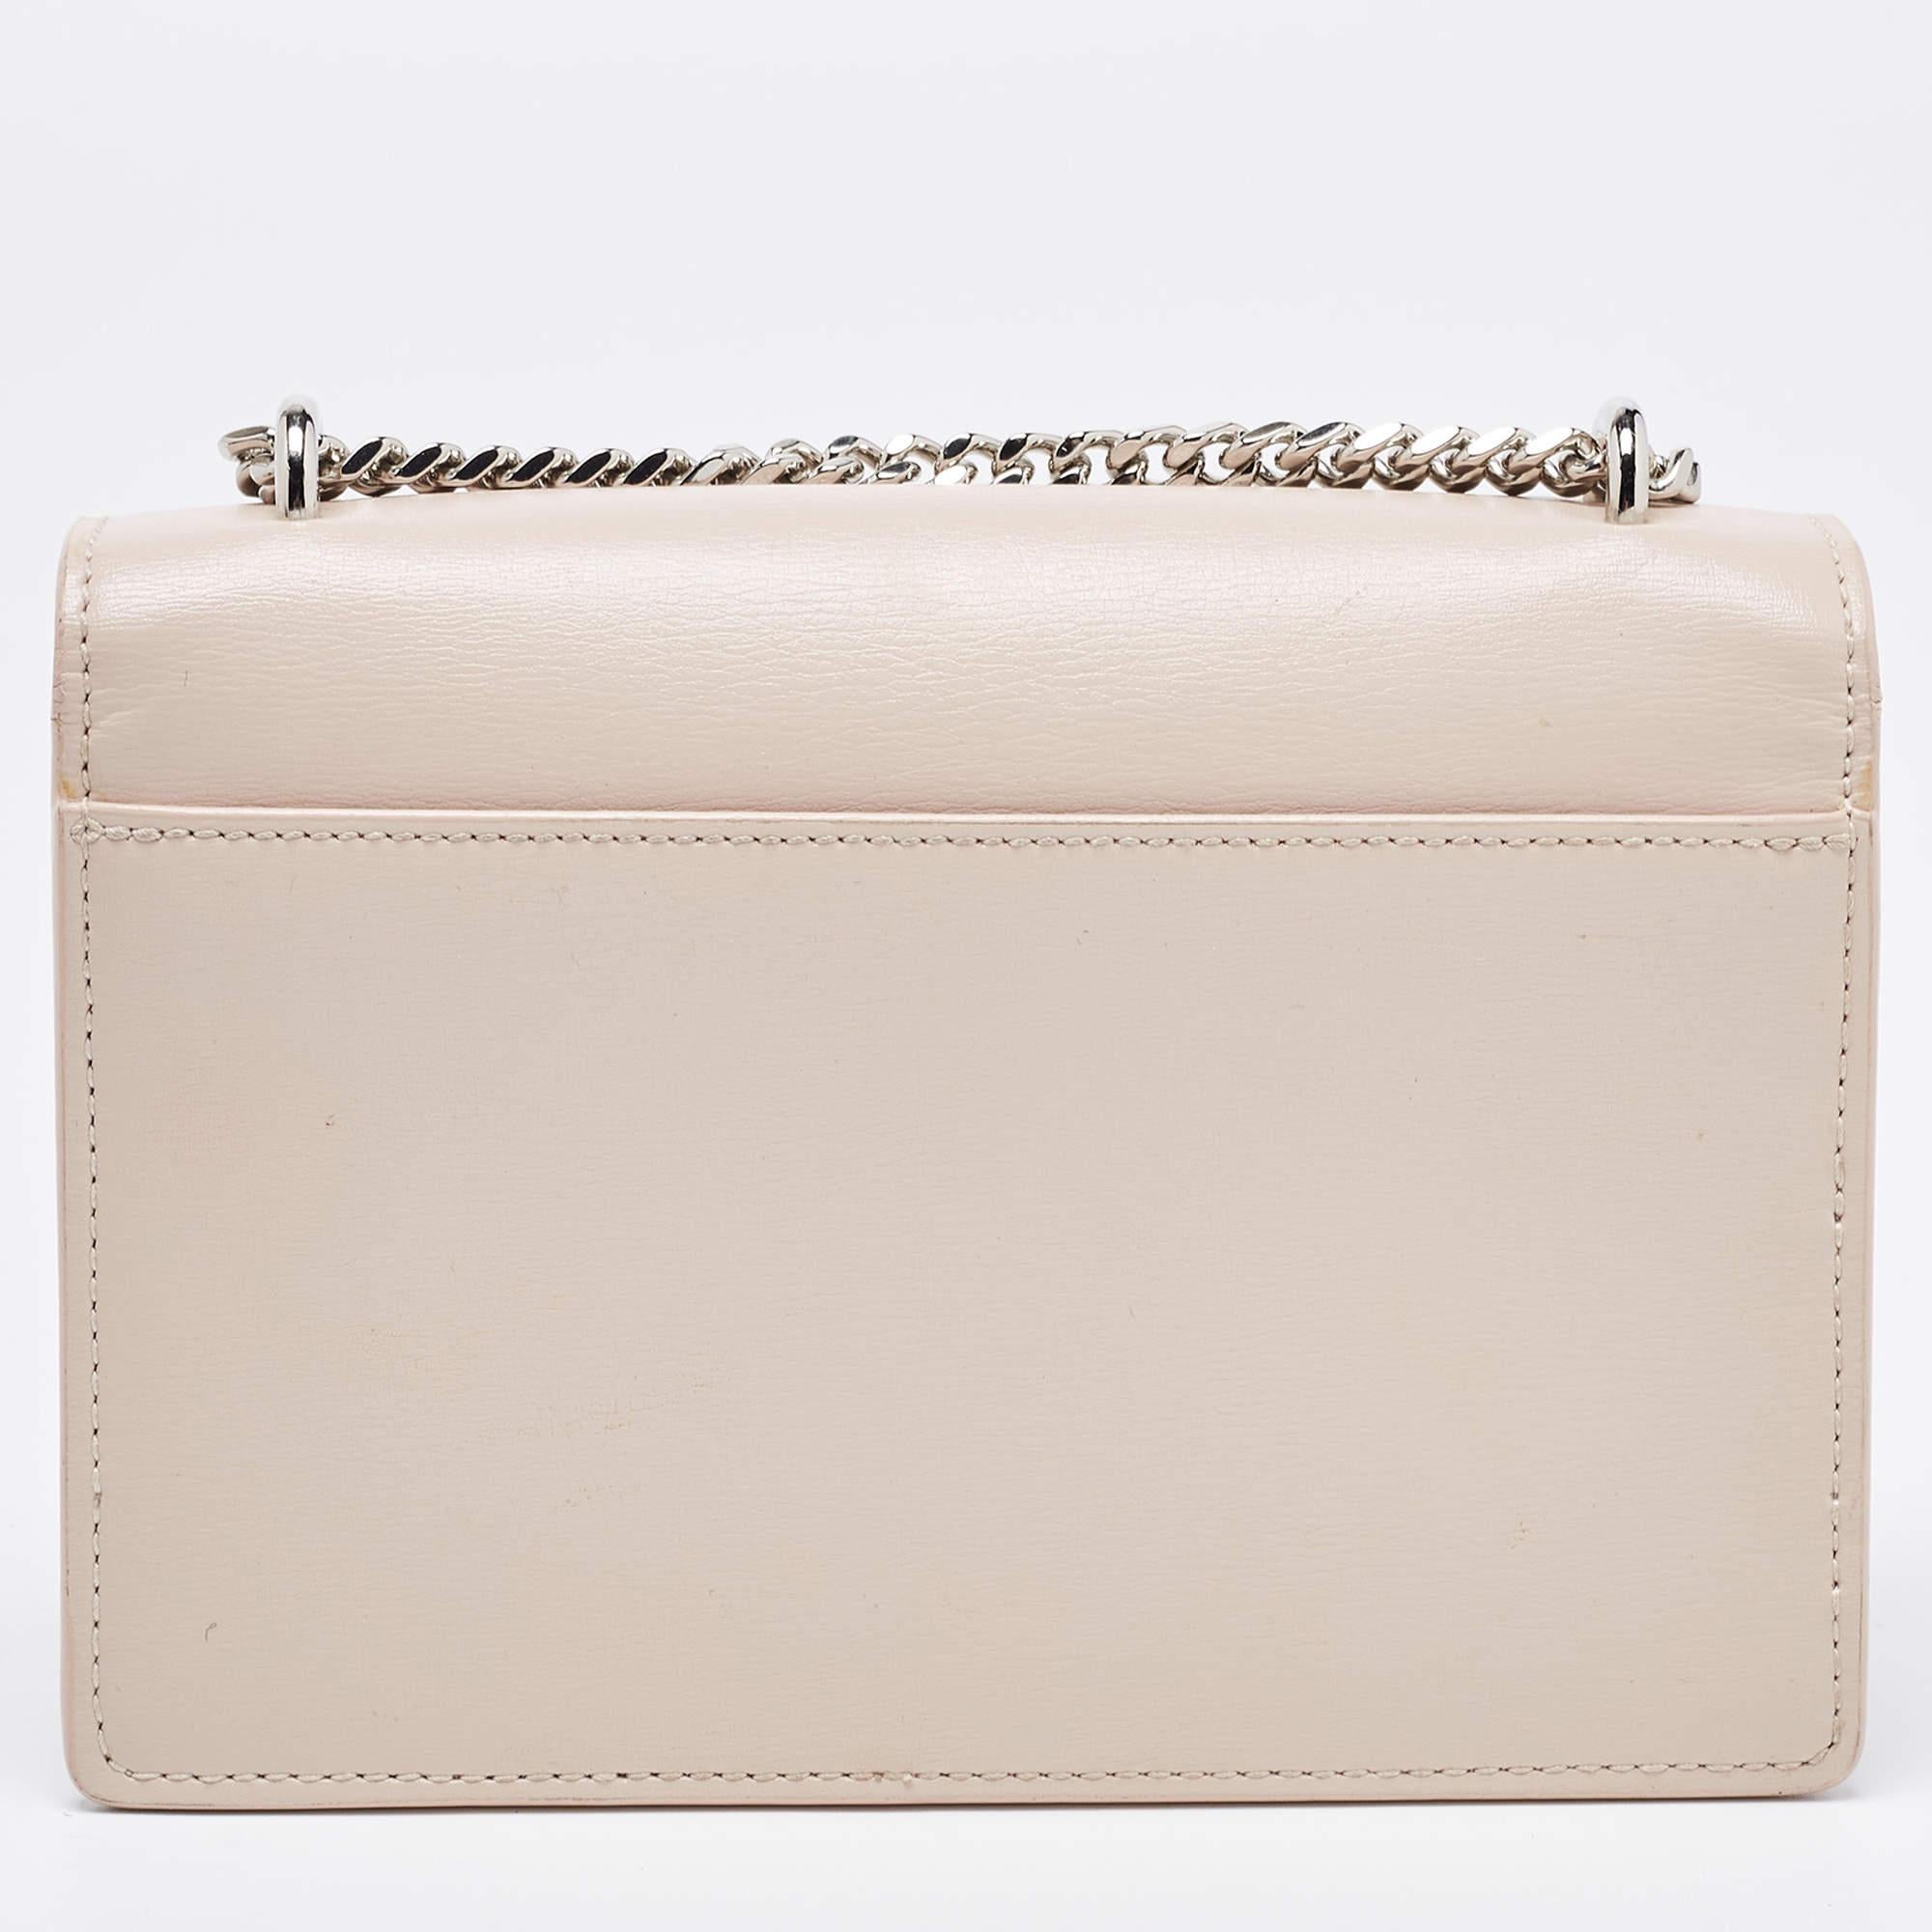 This wallet on chain is conveniently designed for easy wear. It comes with a well-spaced interior for you to arrange your cards and cash neatly. This stylish piece is complete with a chain link.

